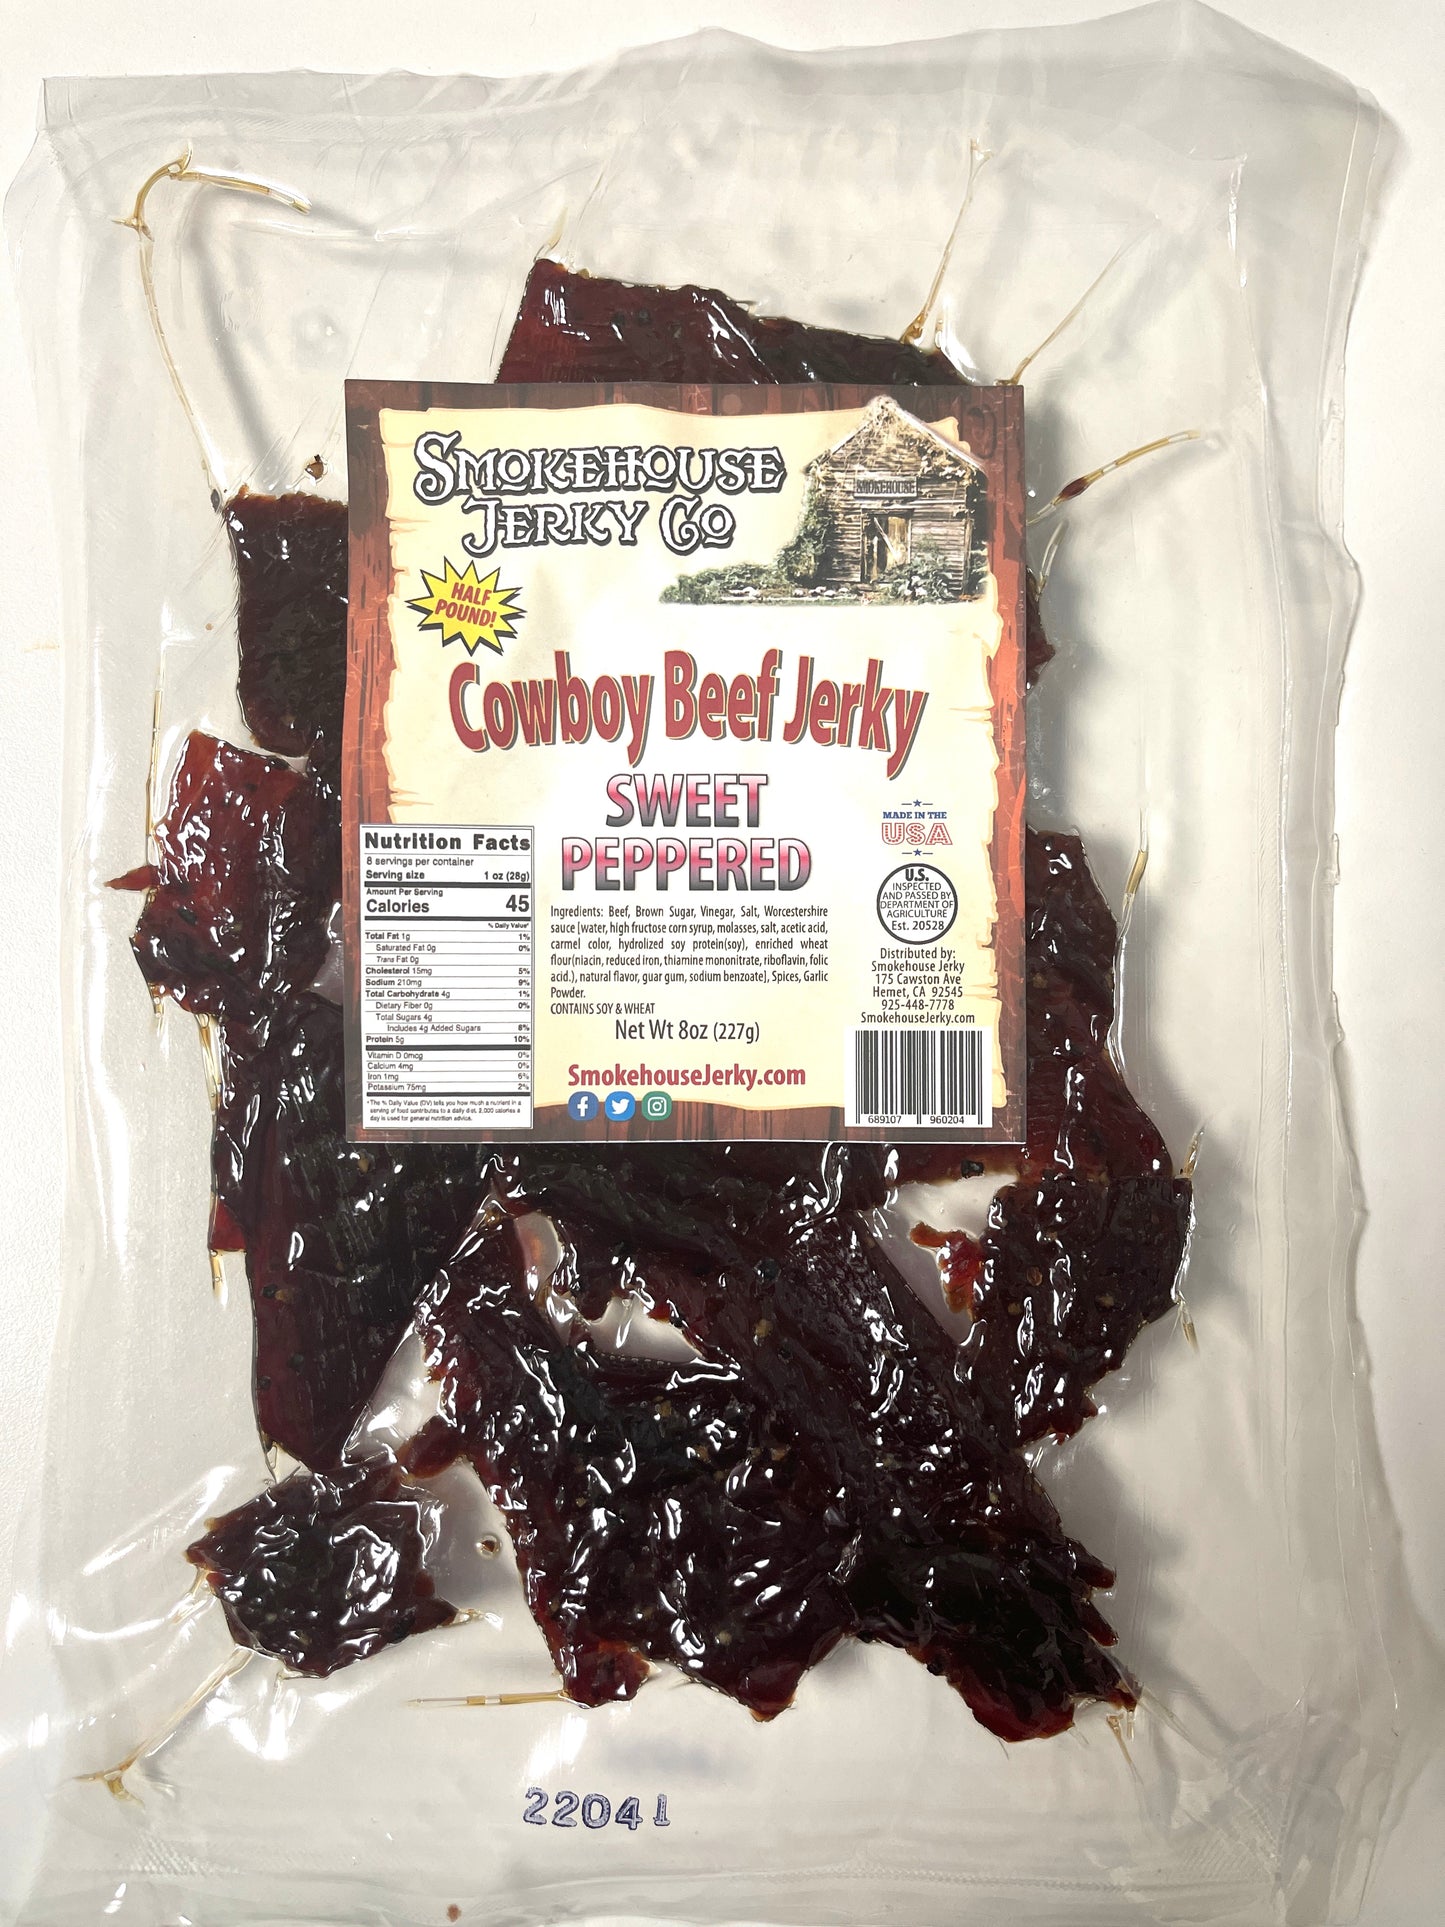 4oz Sweet Peppered Cowboy Beef Jerky